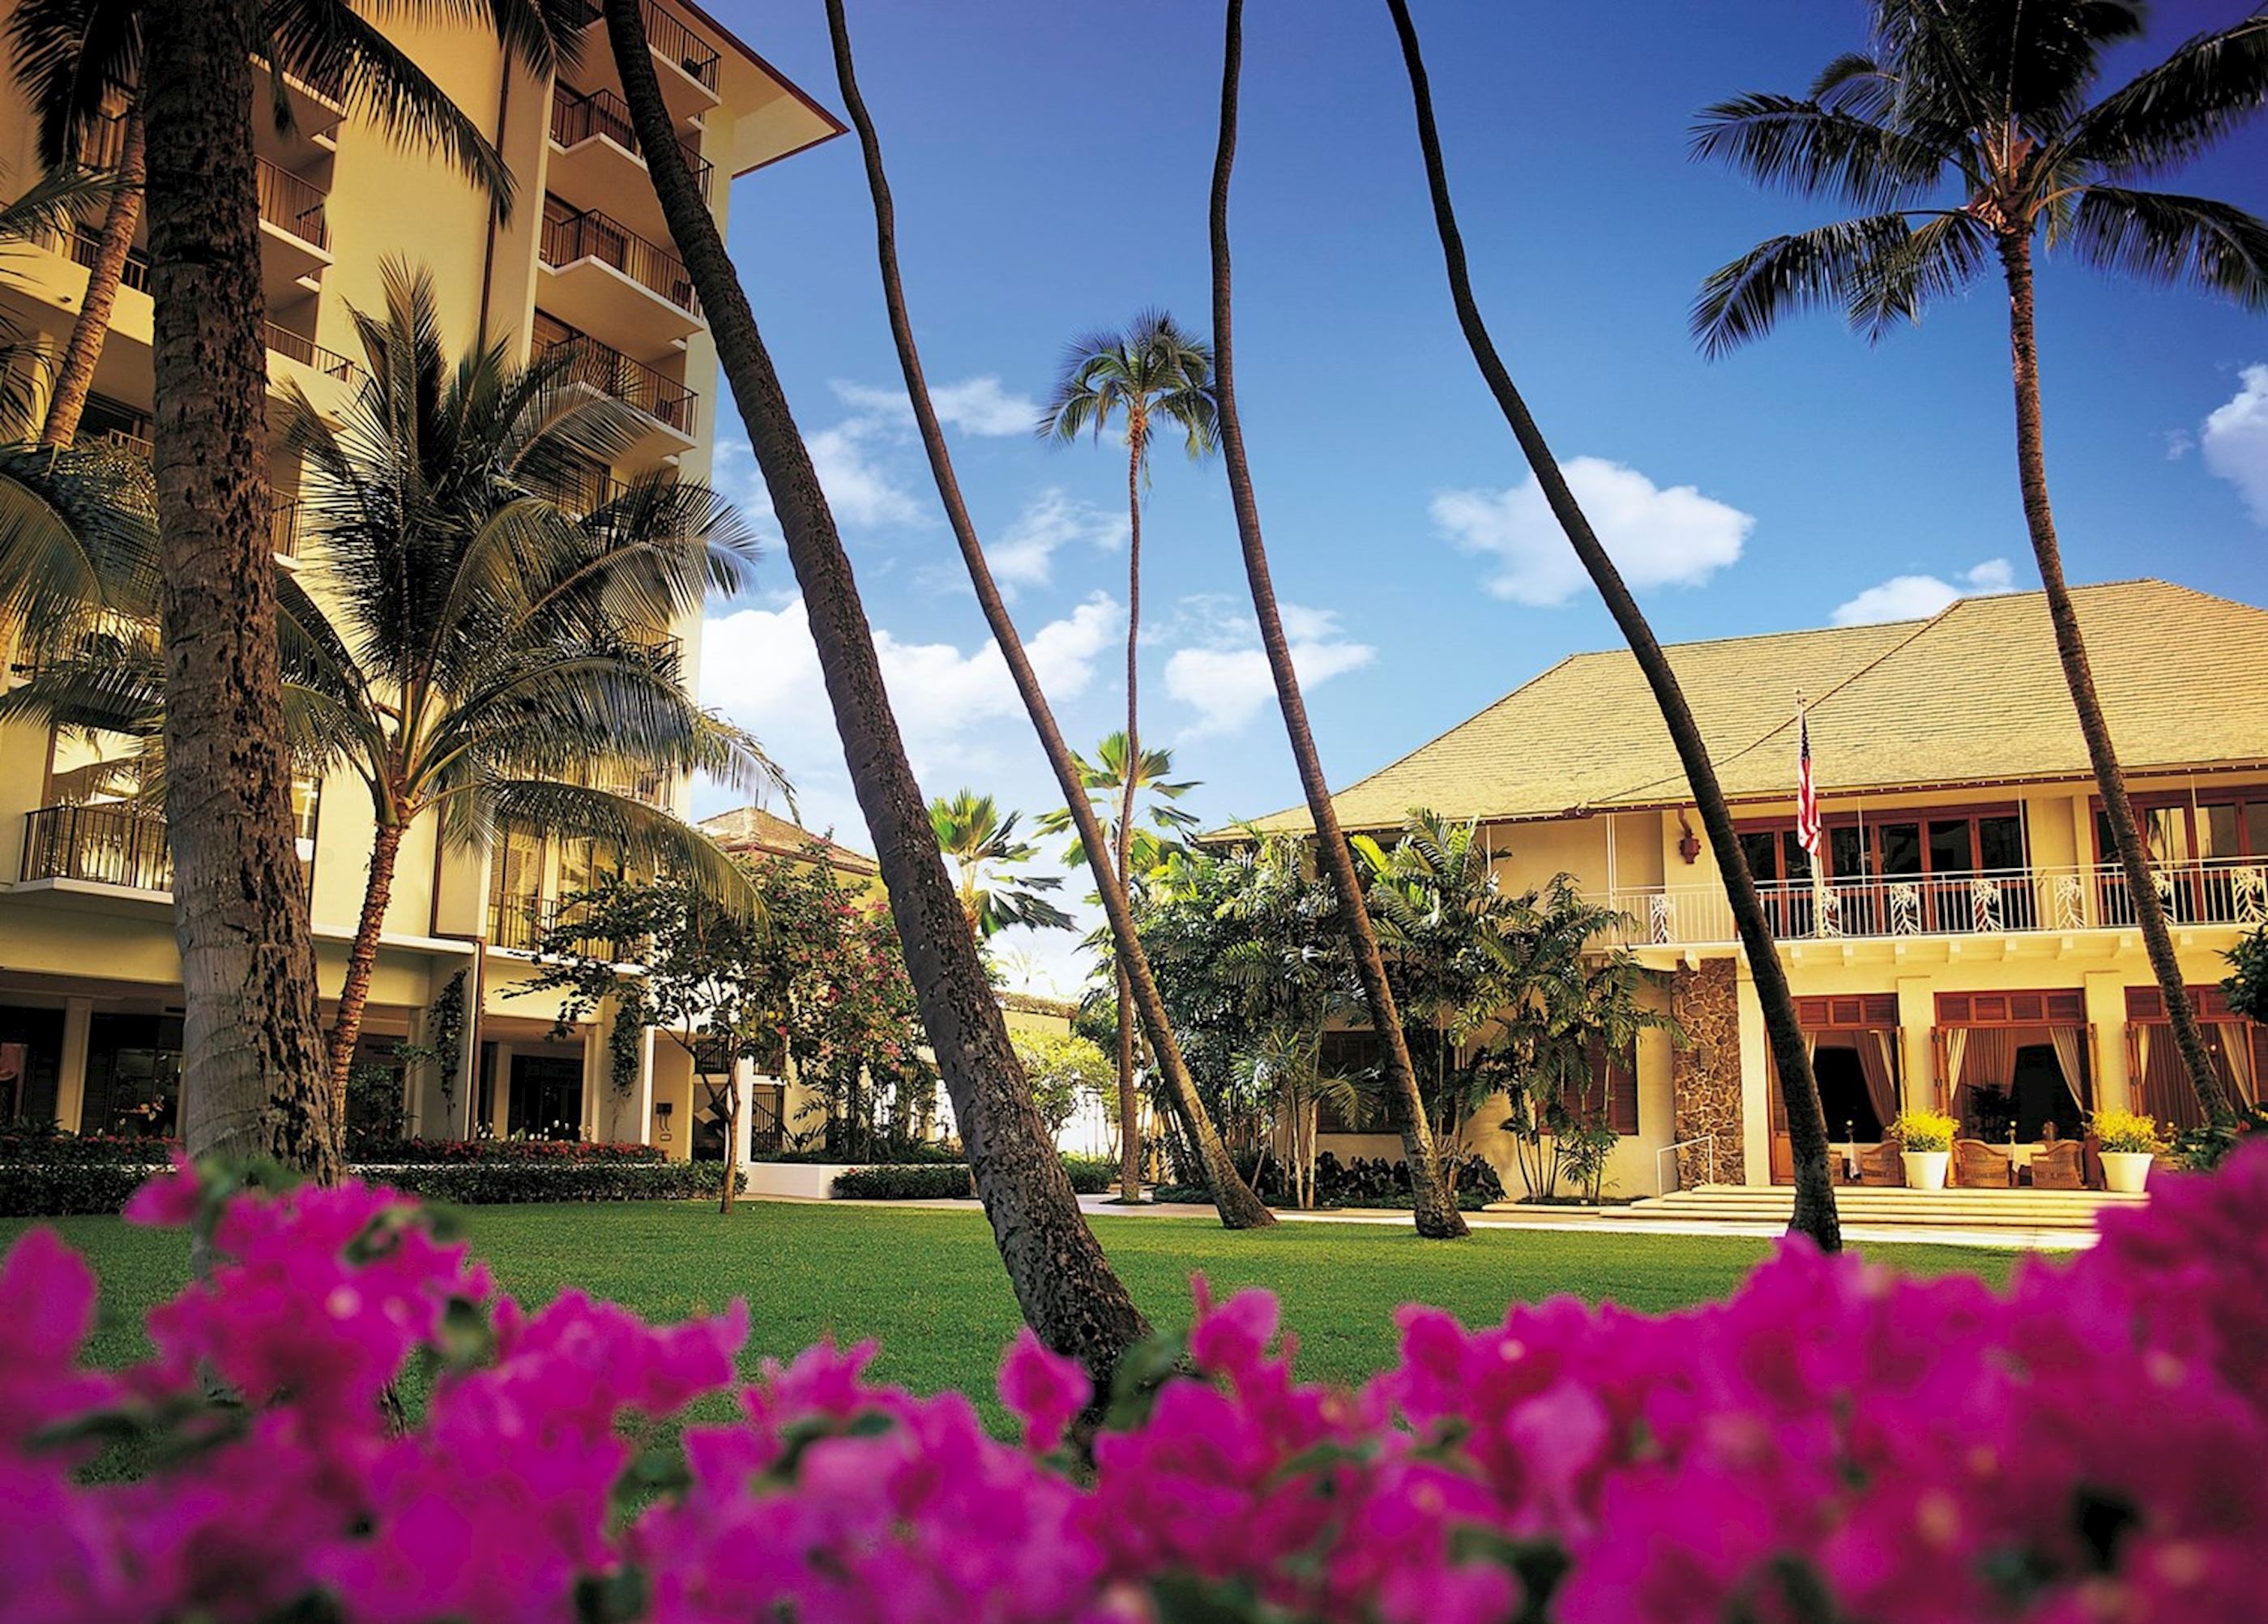 Halekulani Review: It's Heavenly at This Honolulu Hotel! – Sand In My ...